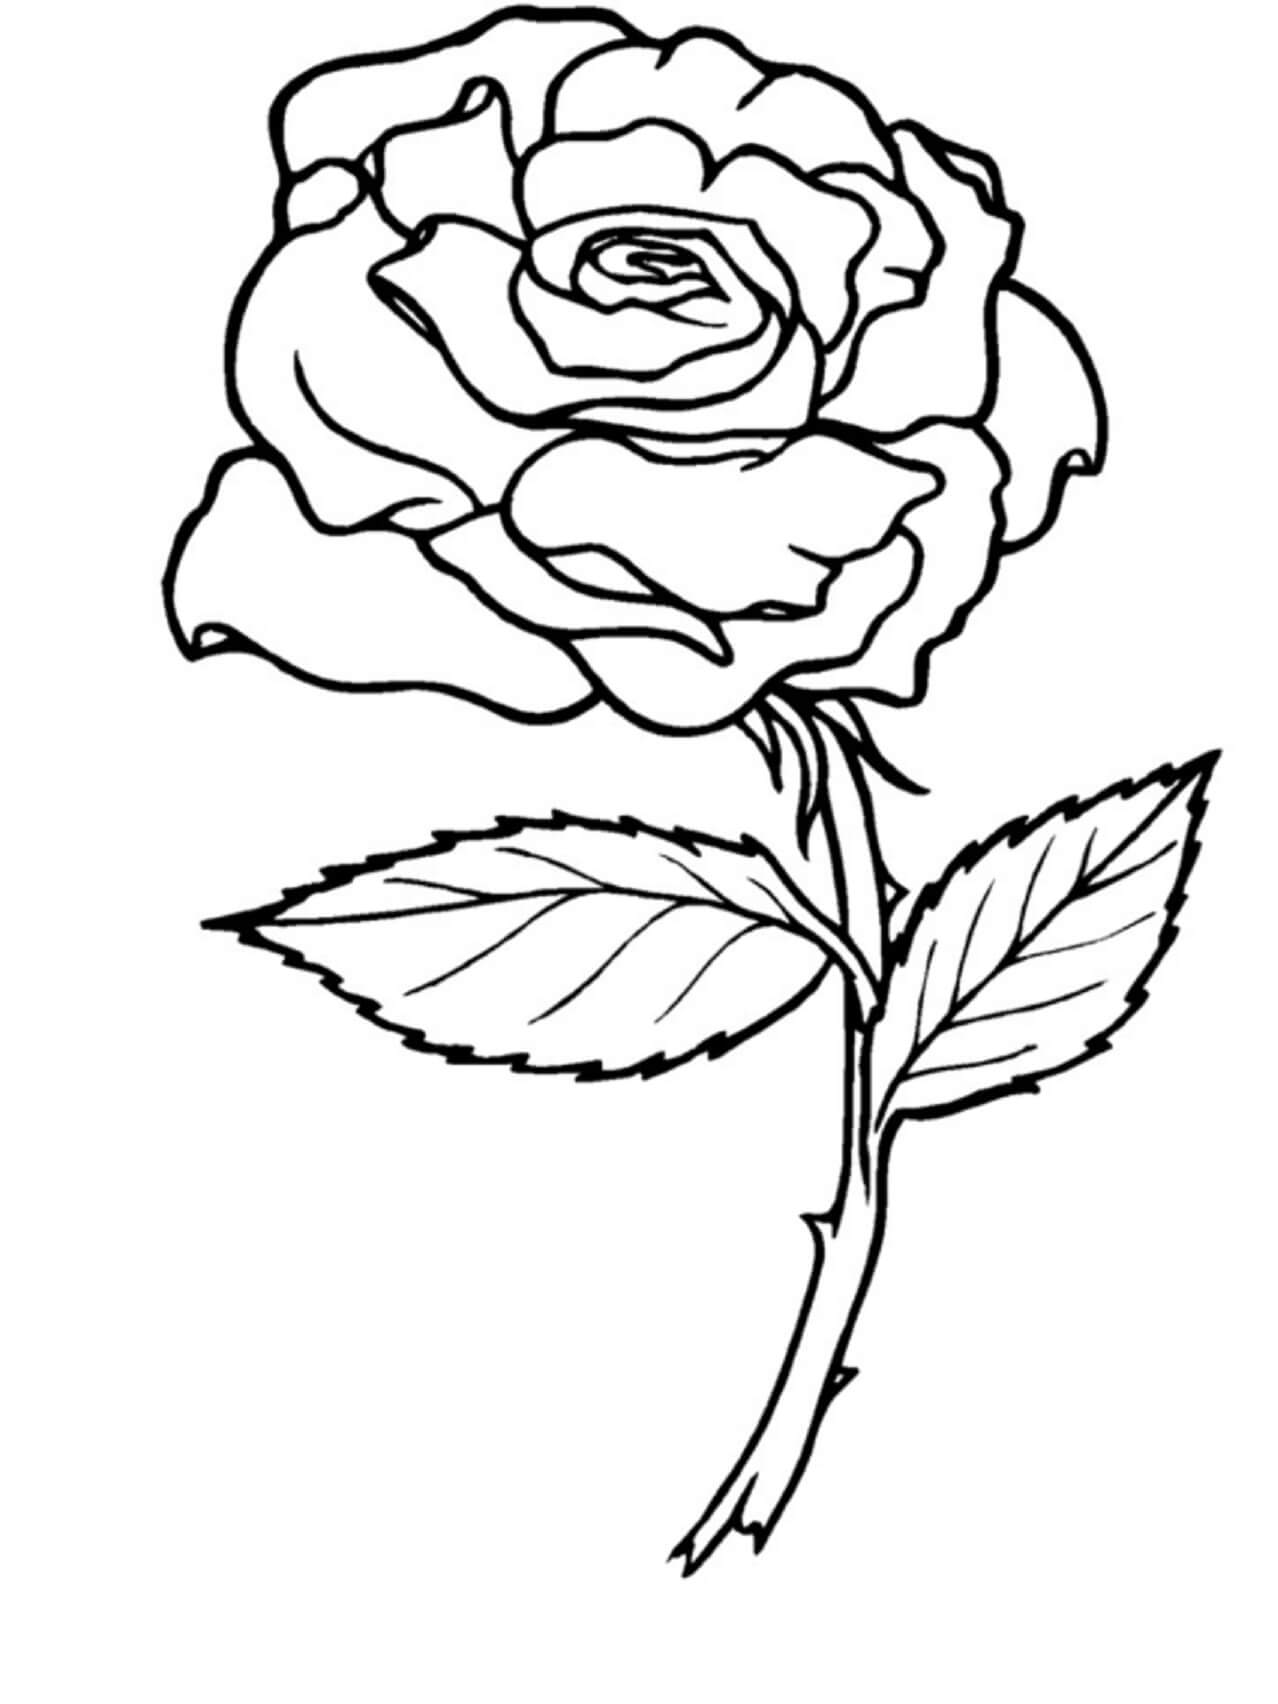 Belle Rose coloring page